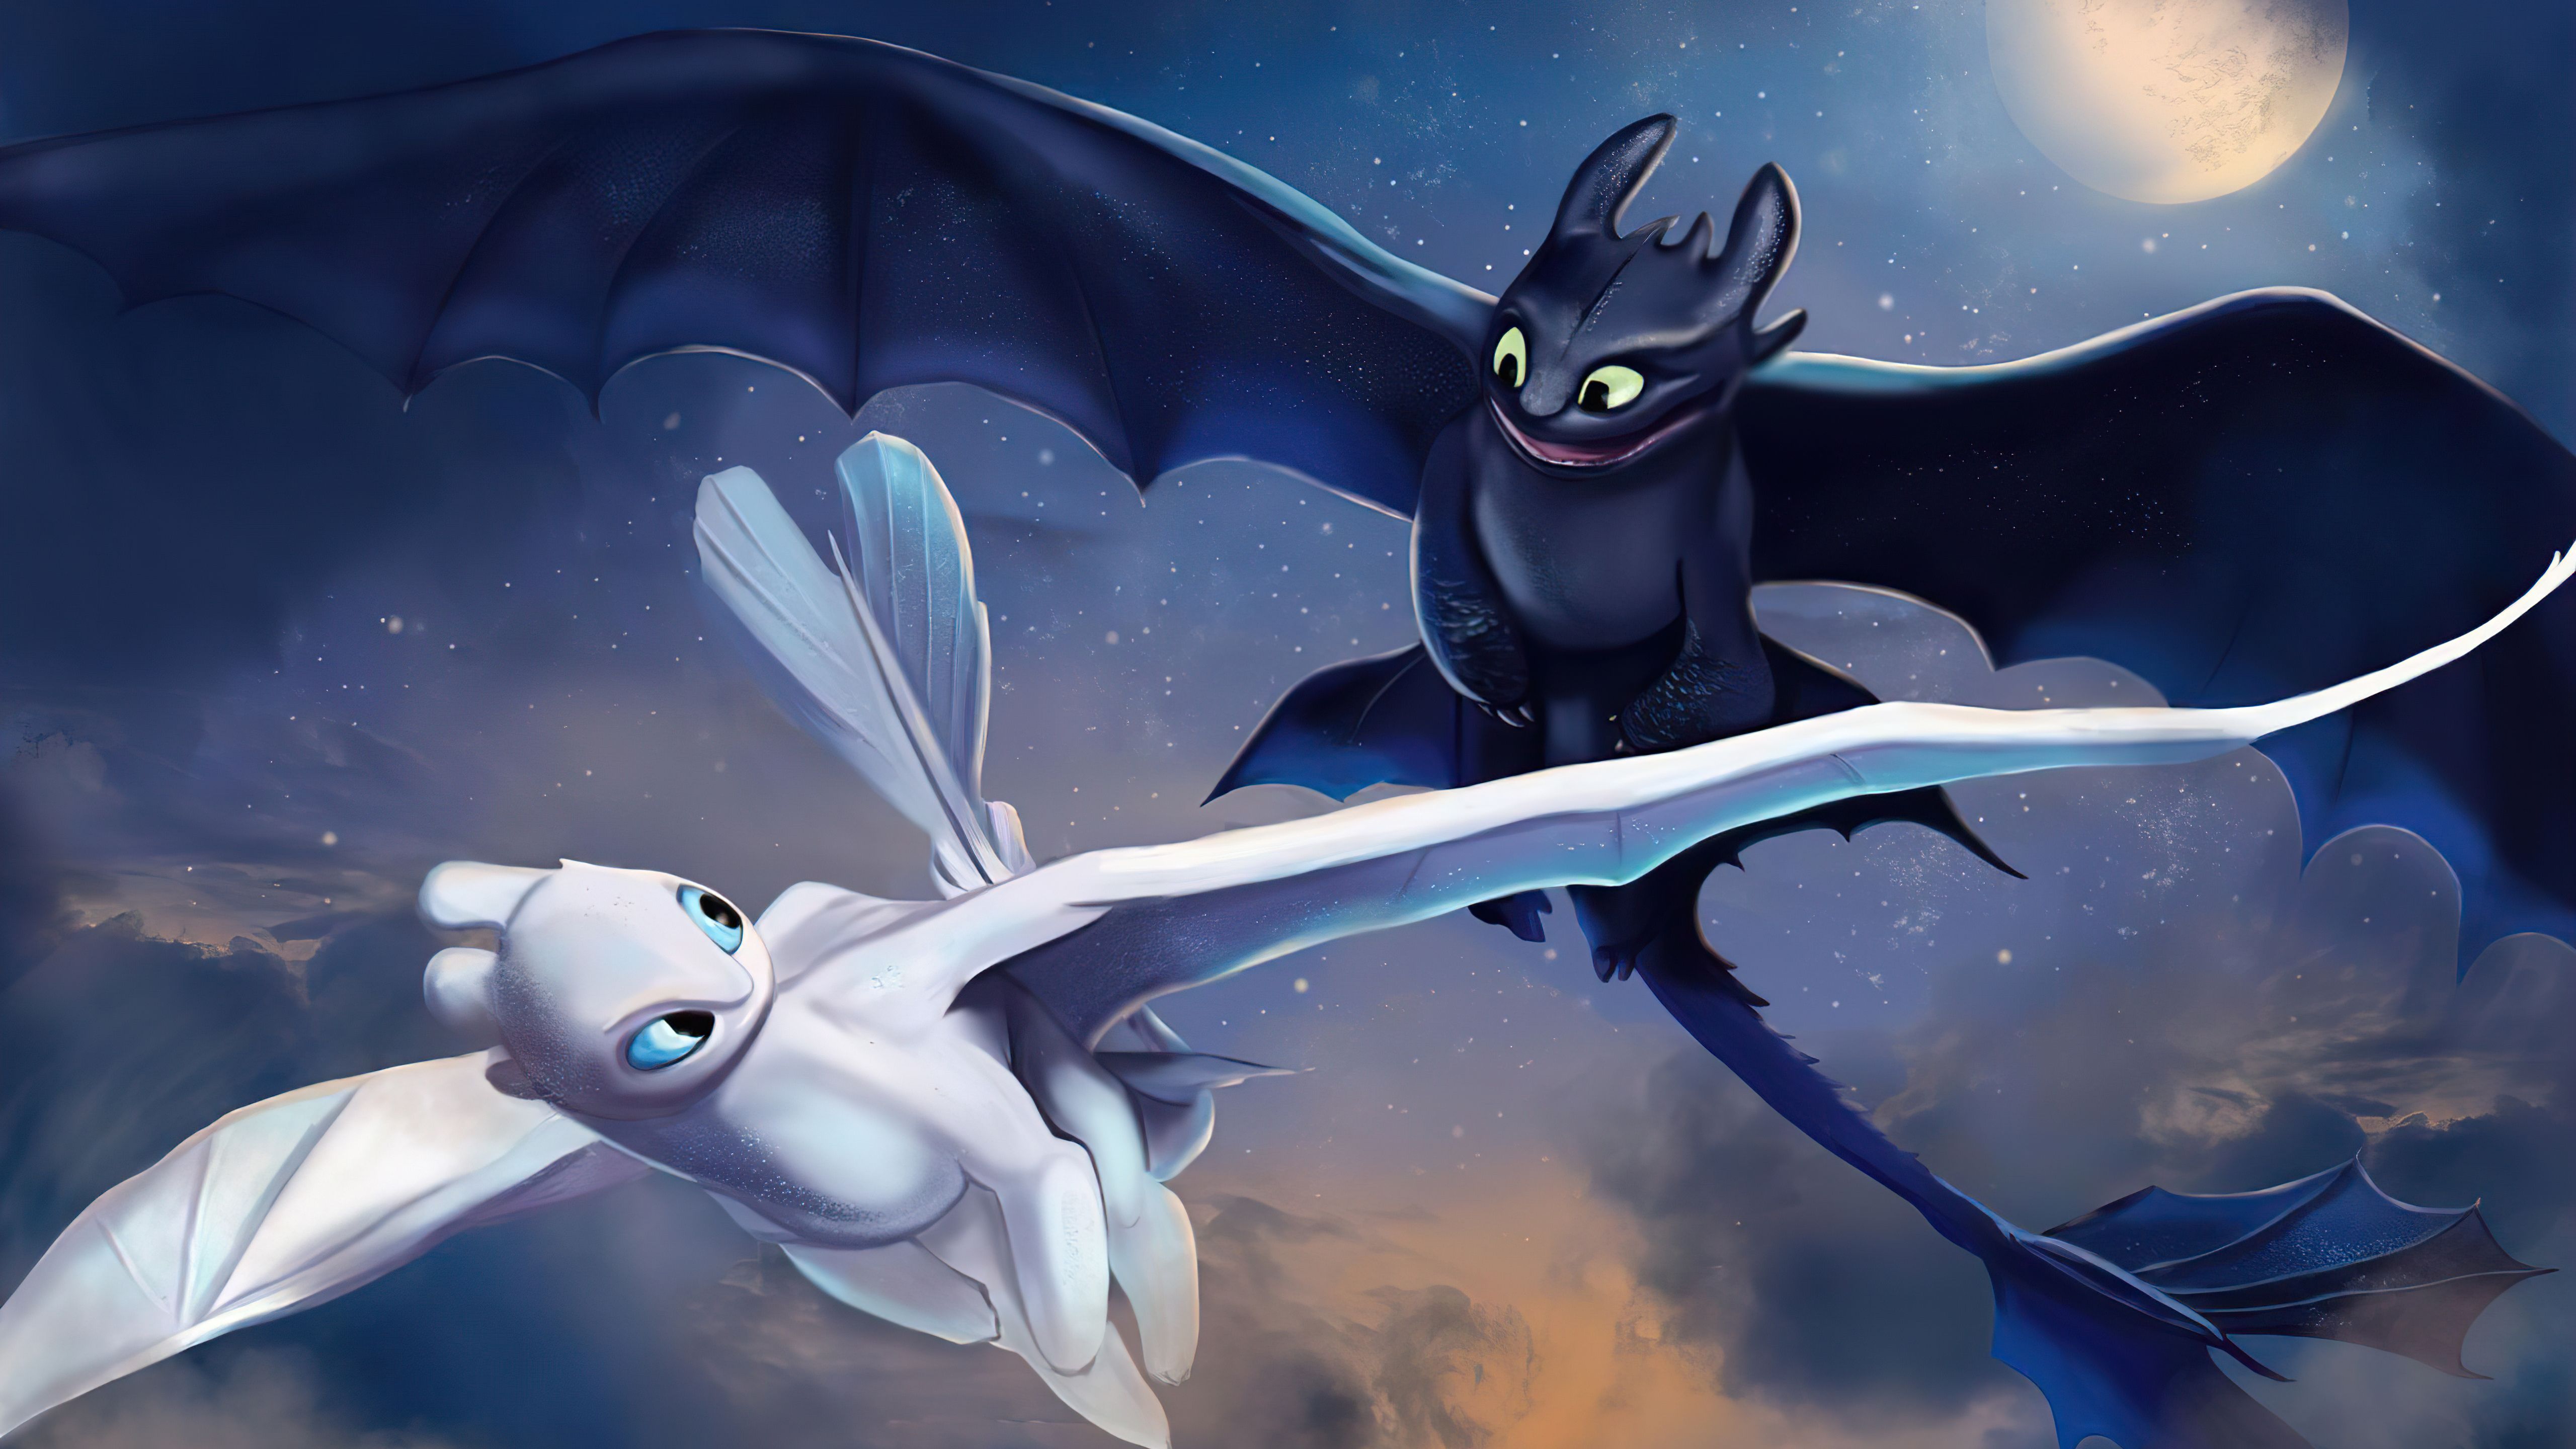 You can also upload and share your favorite Toothless and the Lightfury wal...